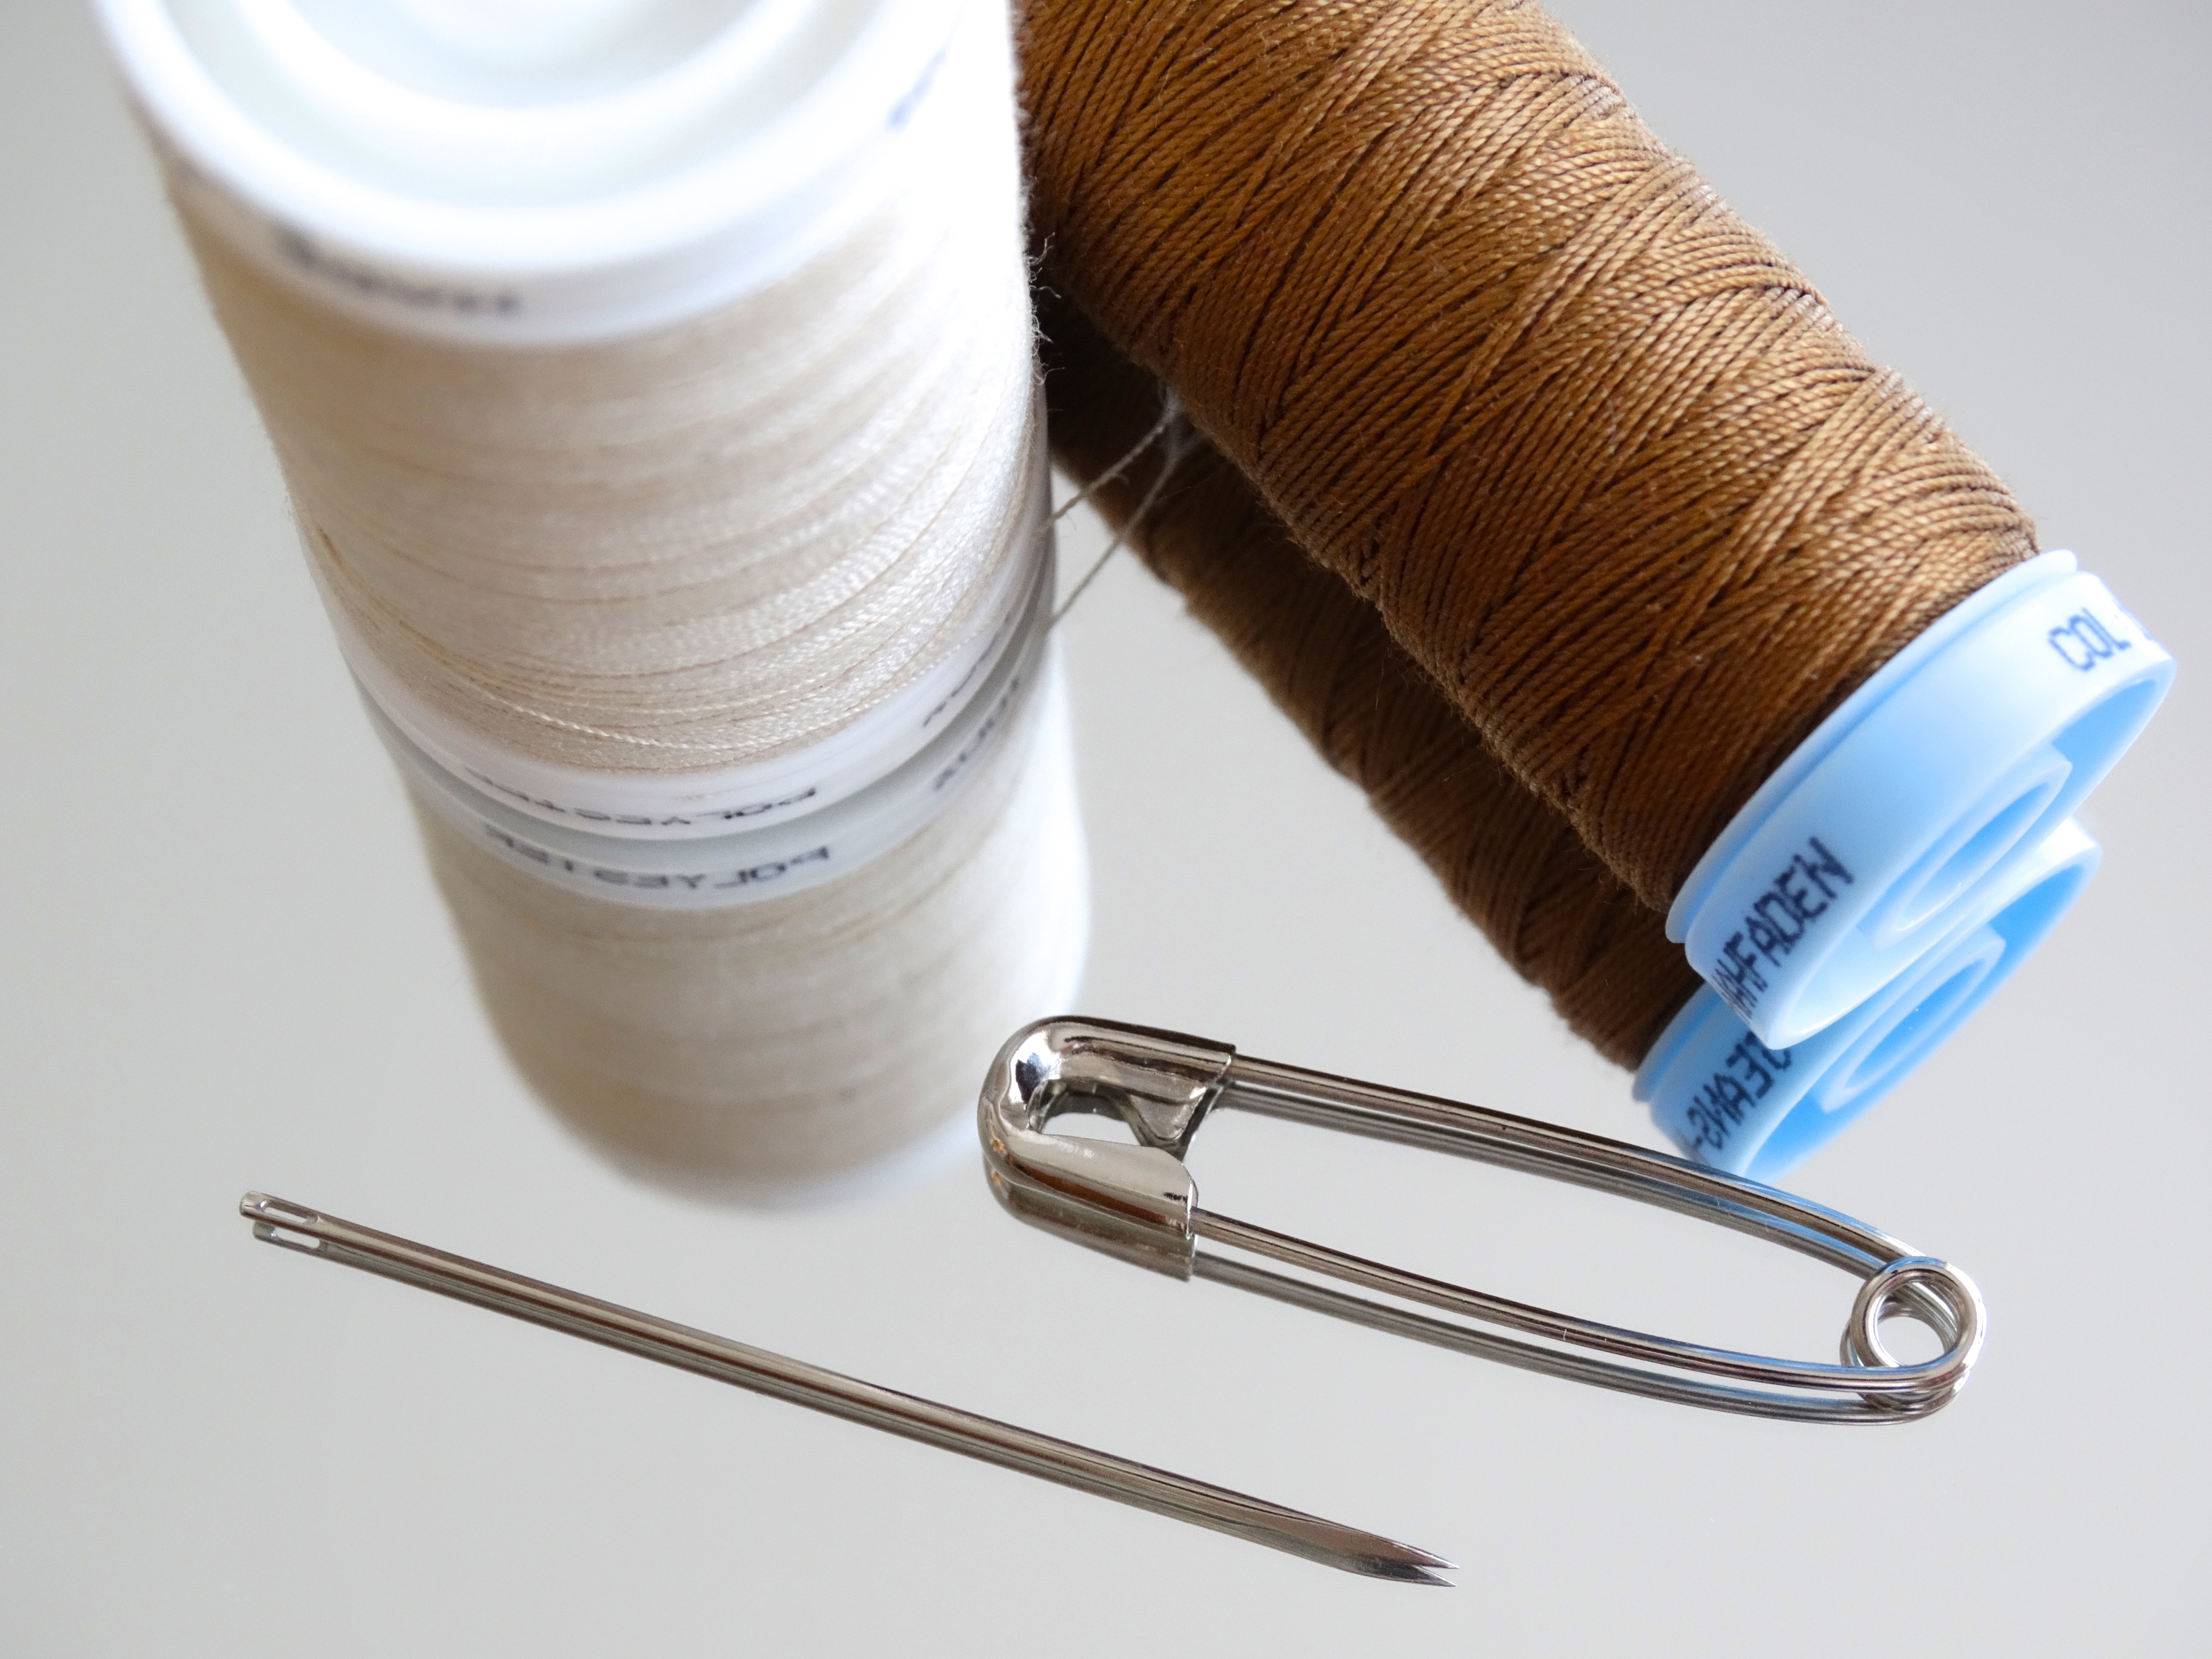 two white and brown sewing threads, needle and safety pin